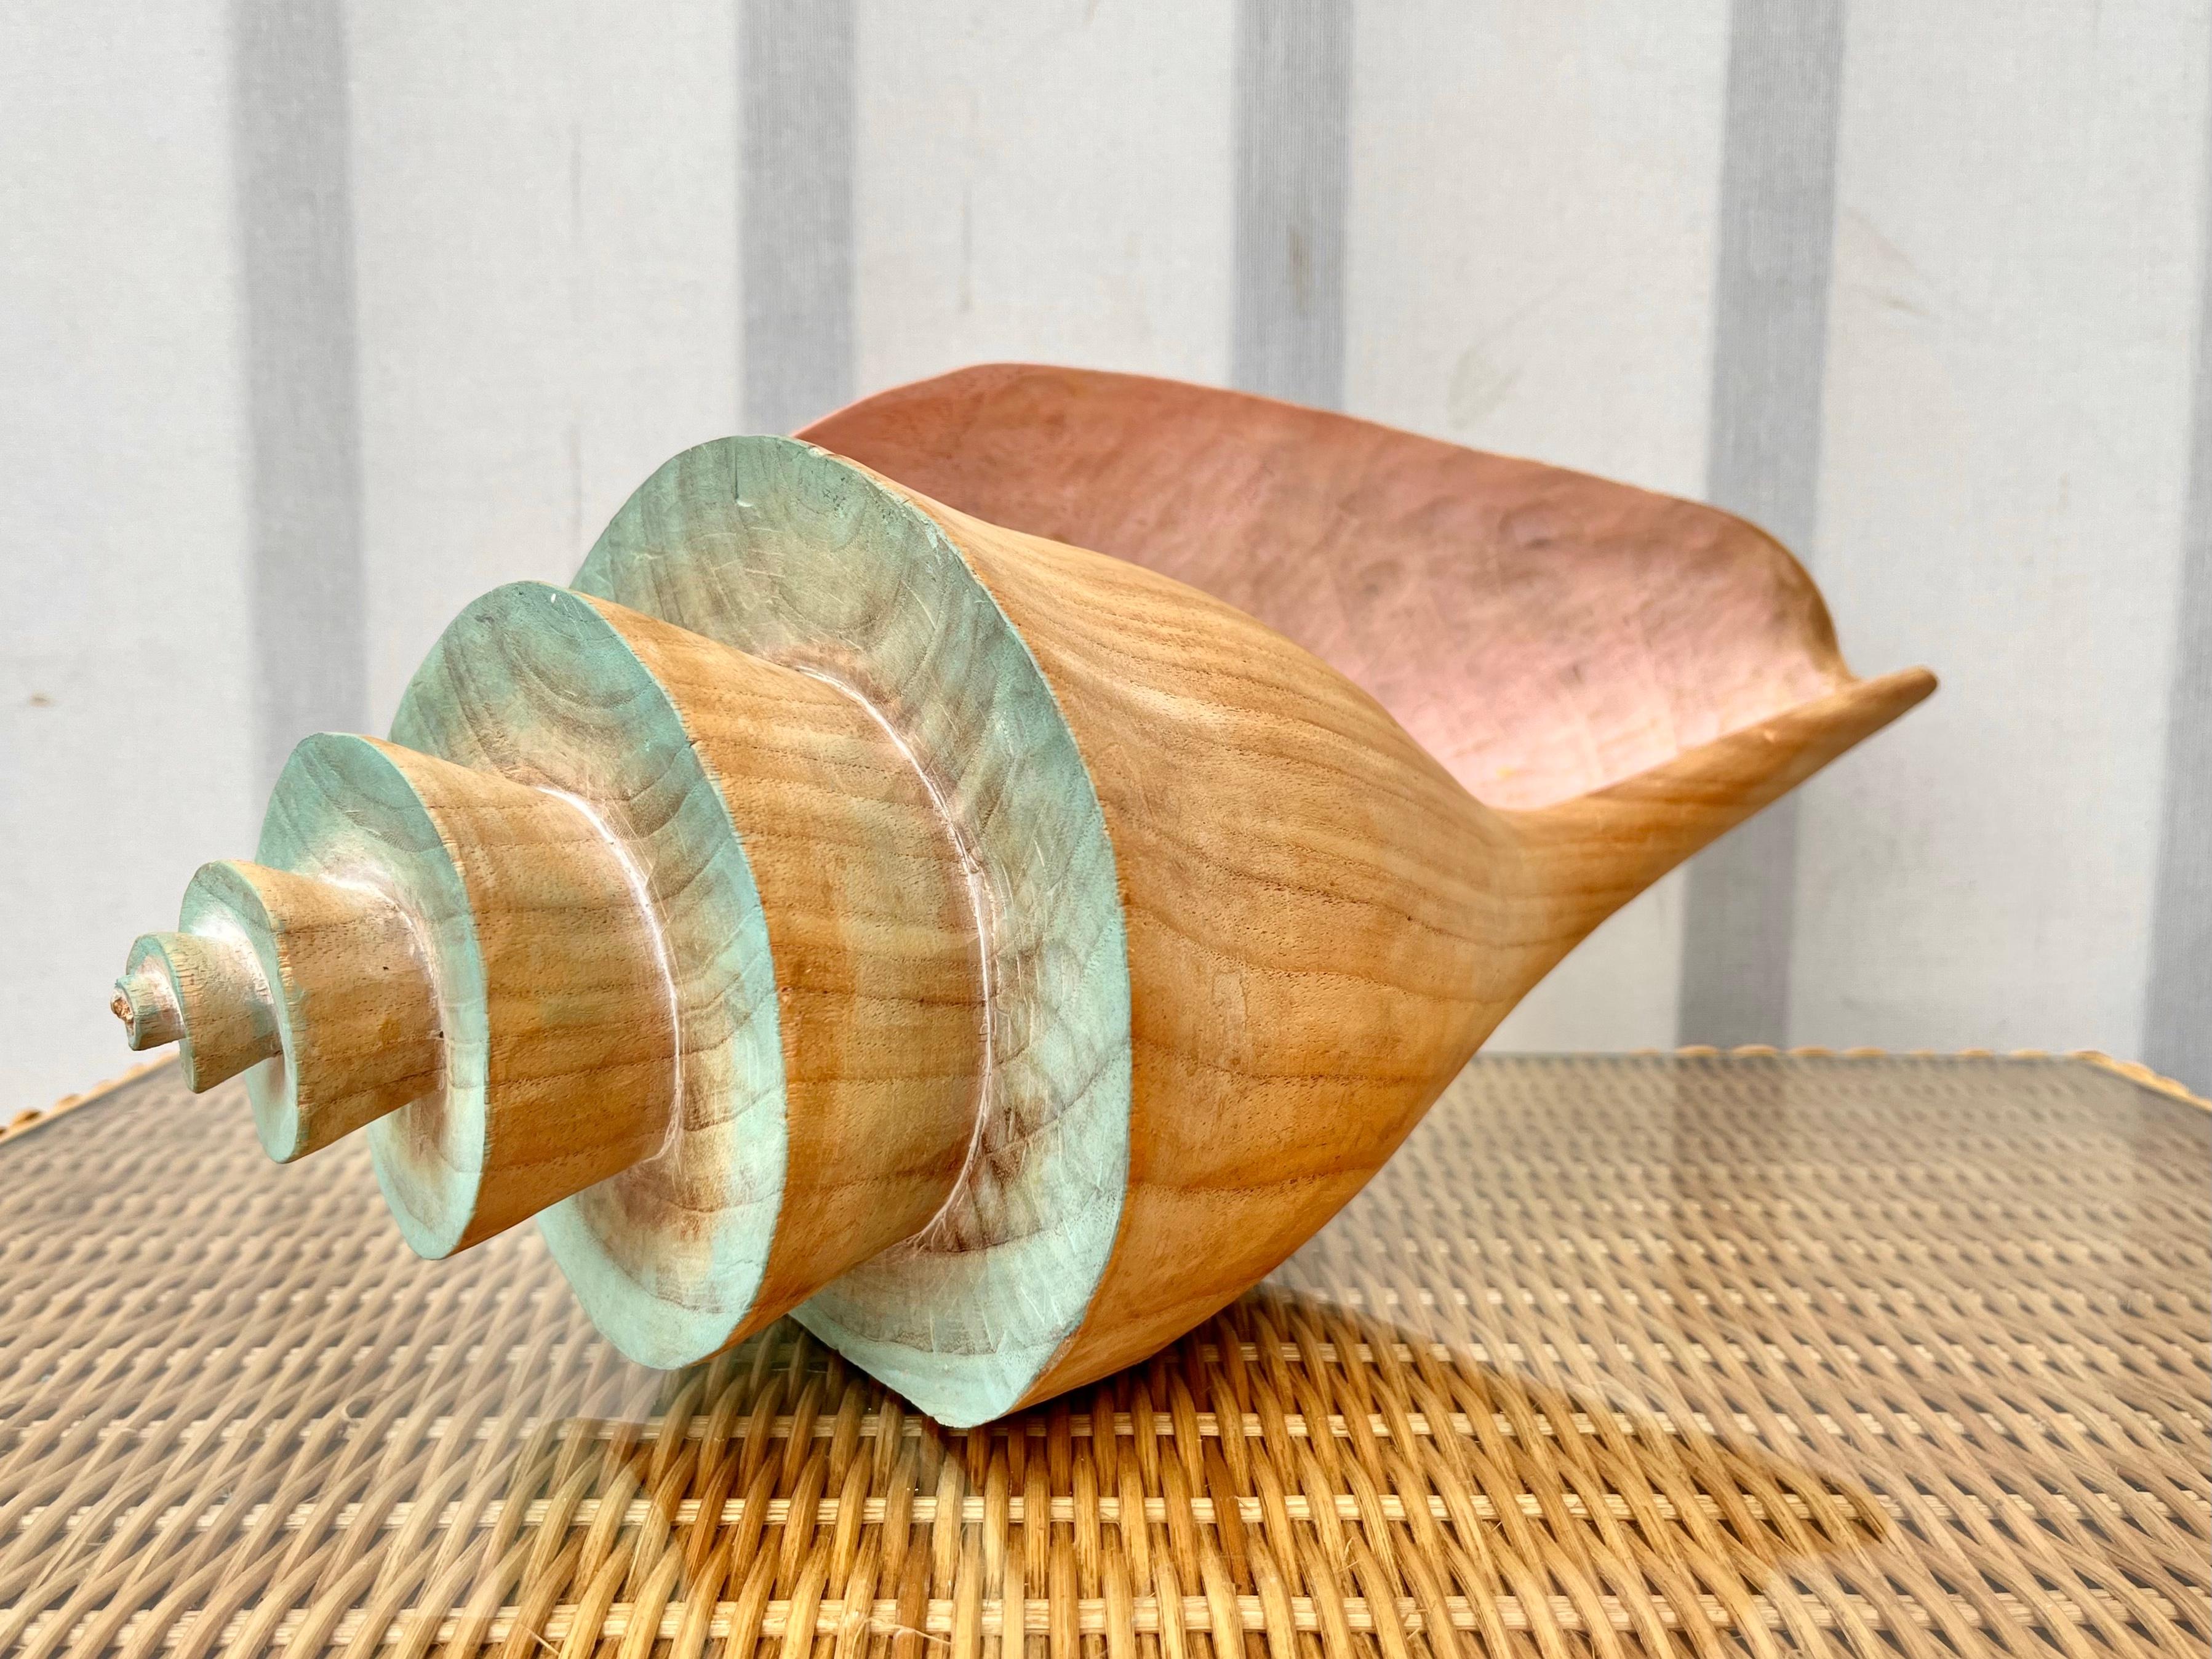 Large Late 20th Century Coastal Style Carved Wood Queen Conch Seashell Sculpture. Circa 1980s 
Carved out of one solid piece of wood, this large queen conch shell figurine features a tropical Inspired design accentuated with teal and pink pastels